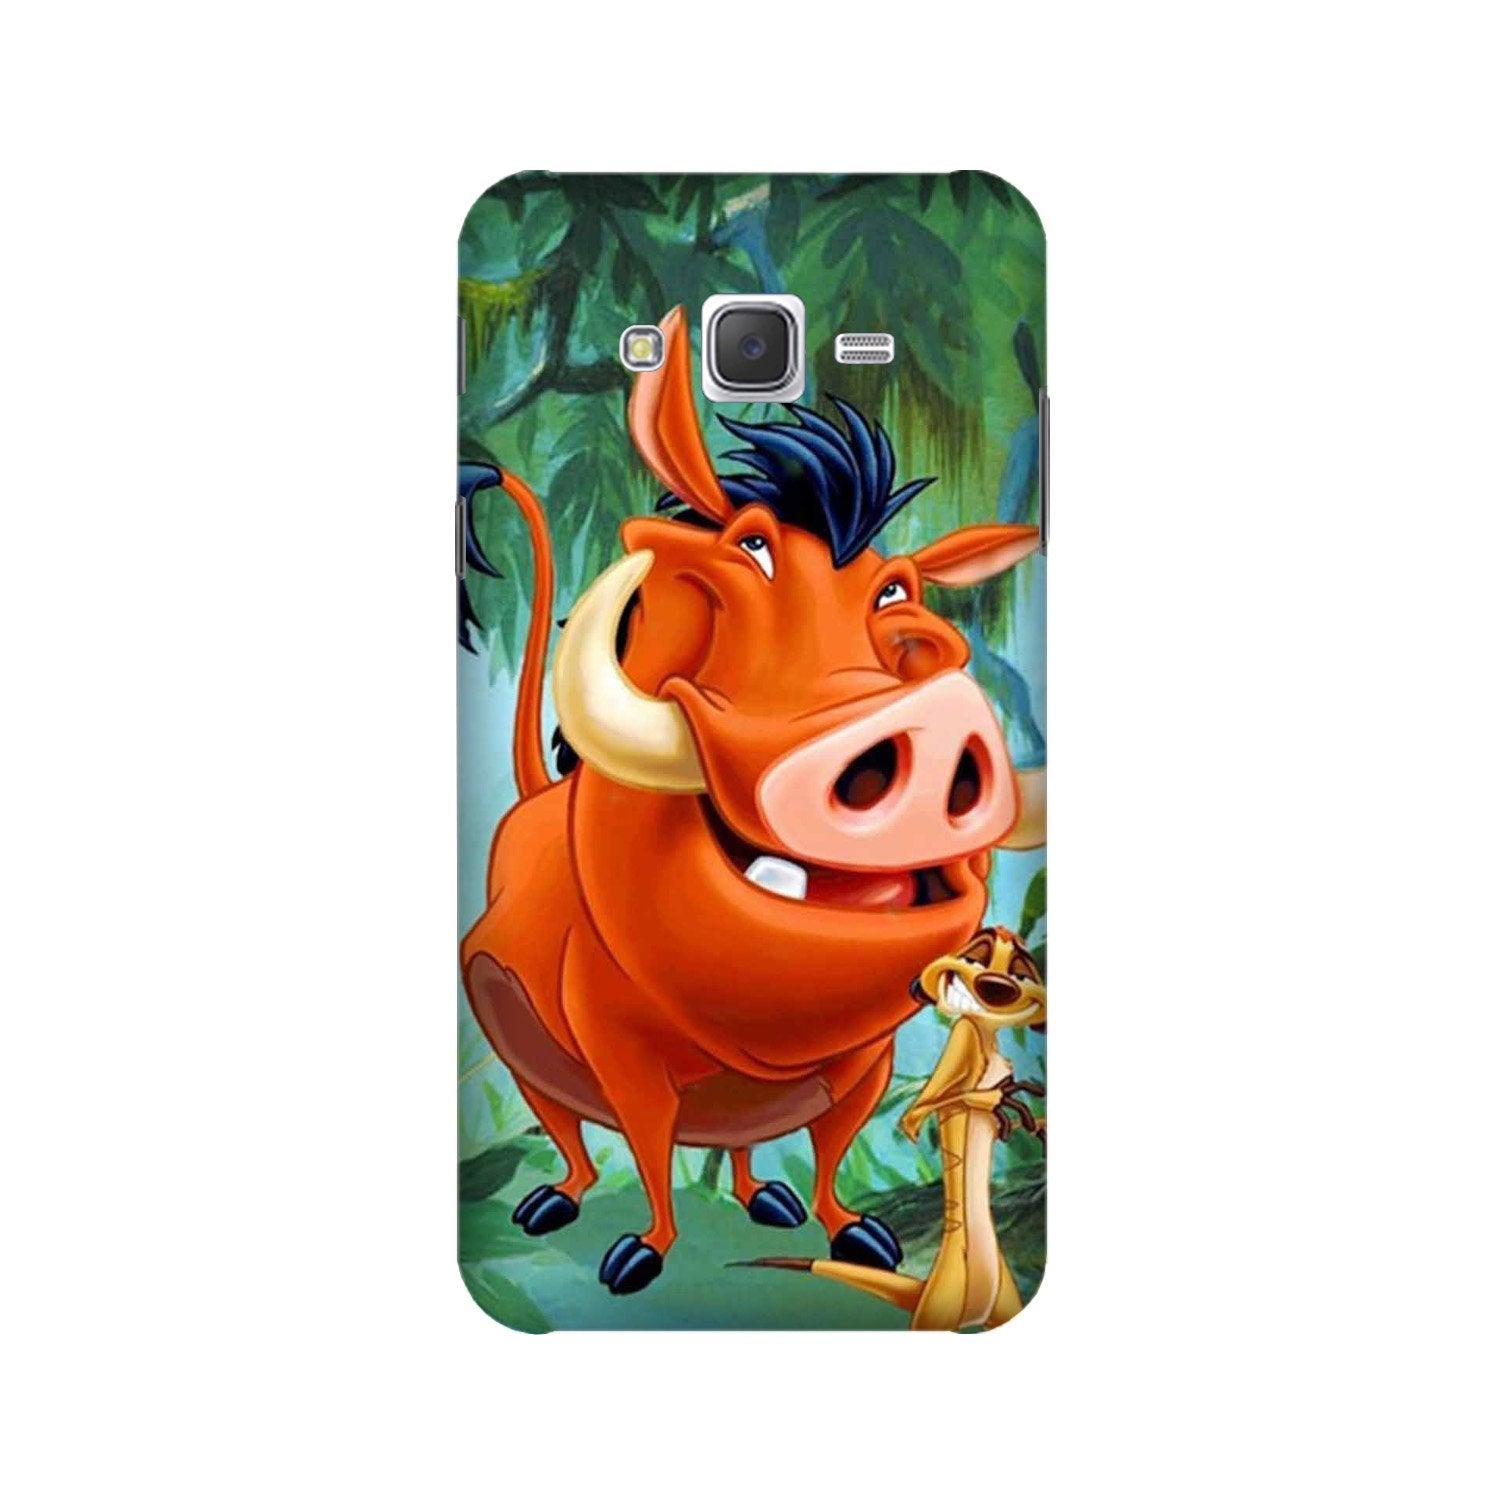 Timon and Pumbaa Mobile Back Case for Galaxy J5 (2015)   (Design - 305)